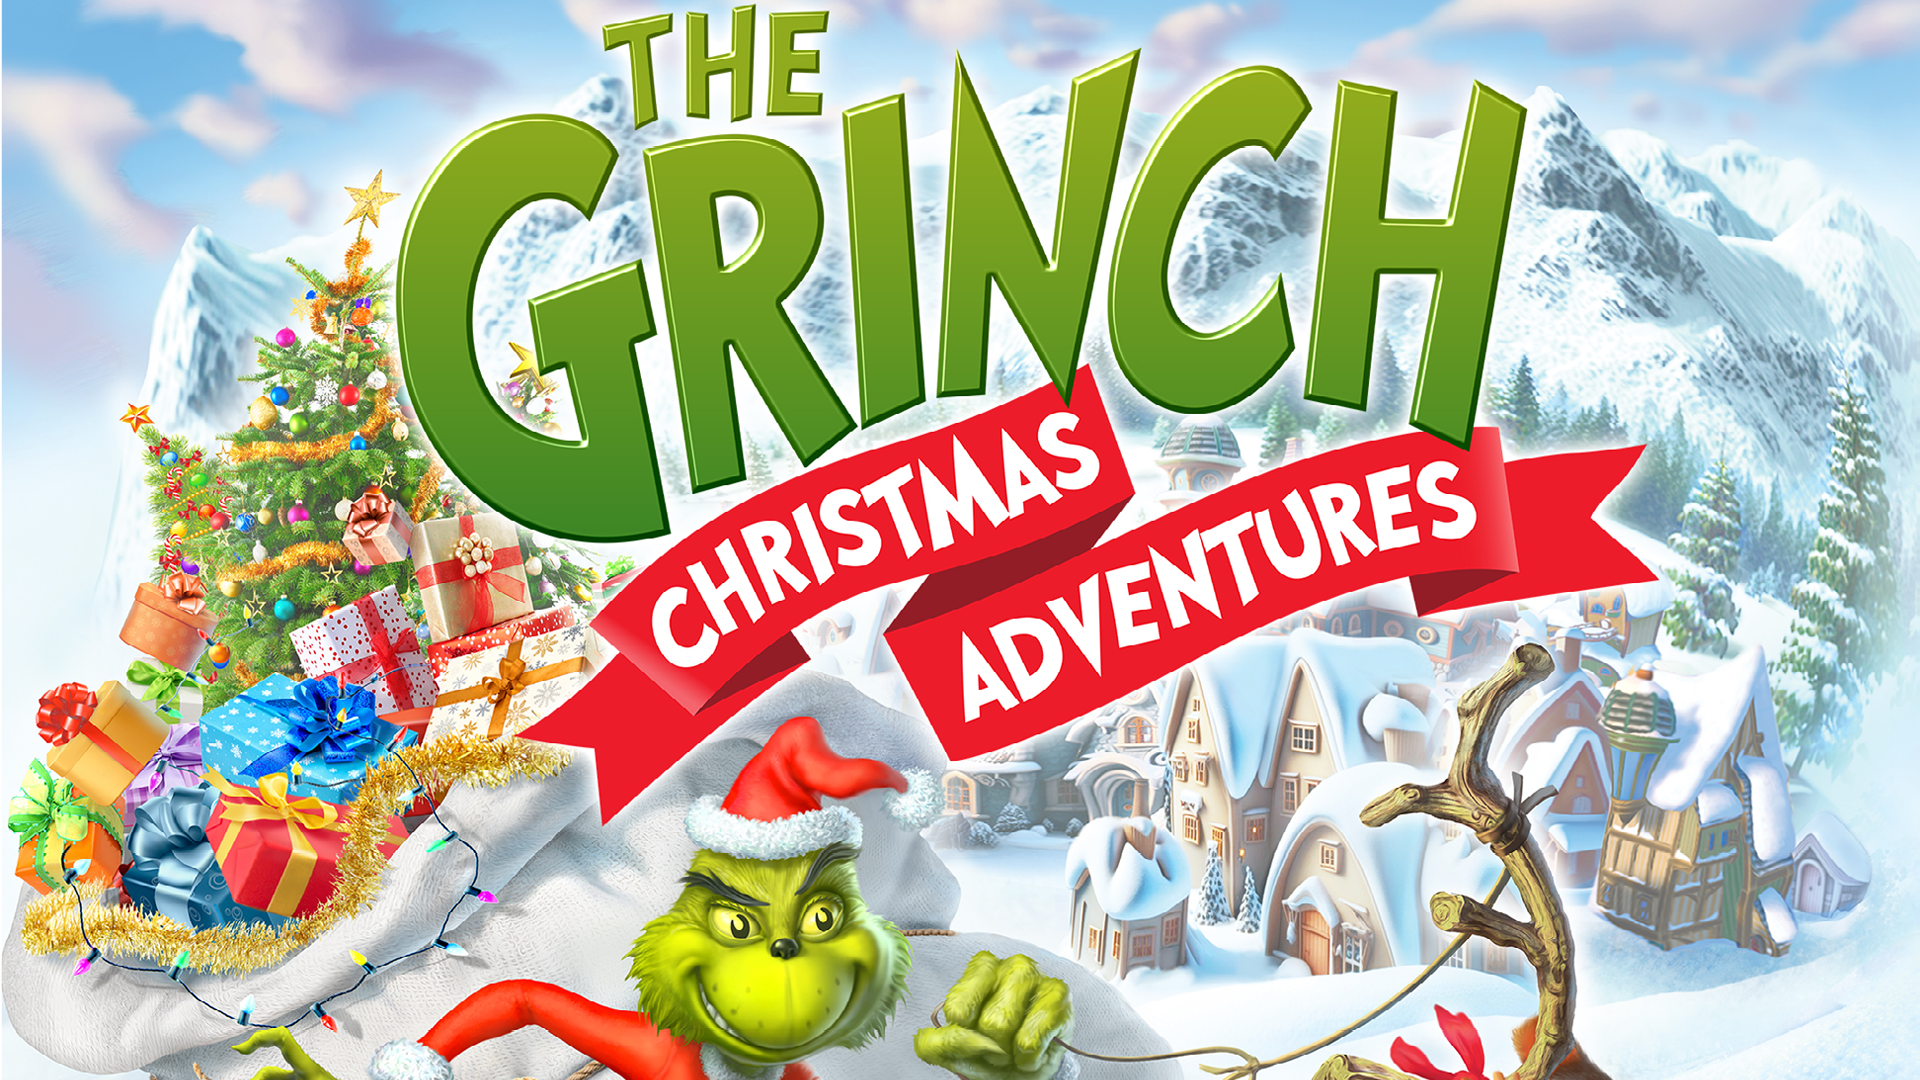 Tis The Grinch Holiday Talk Show Trailer 